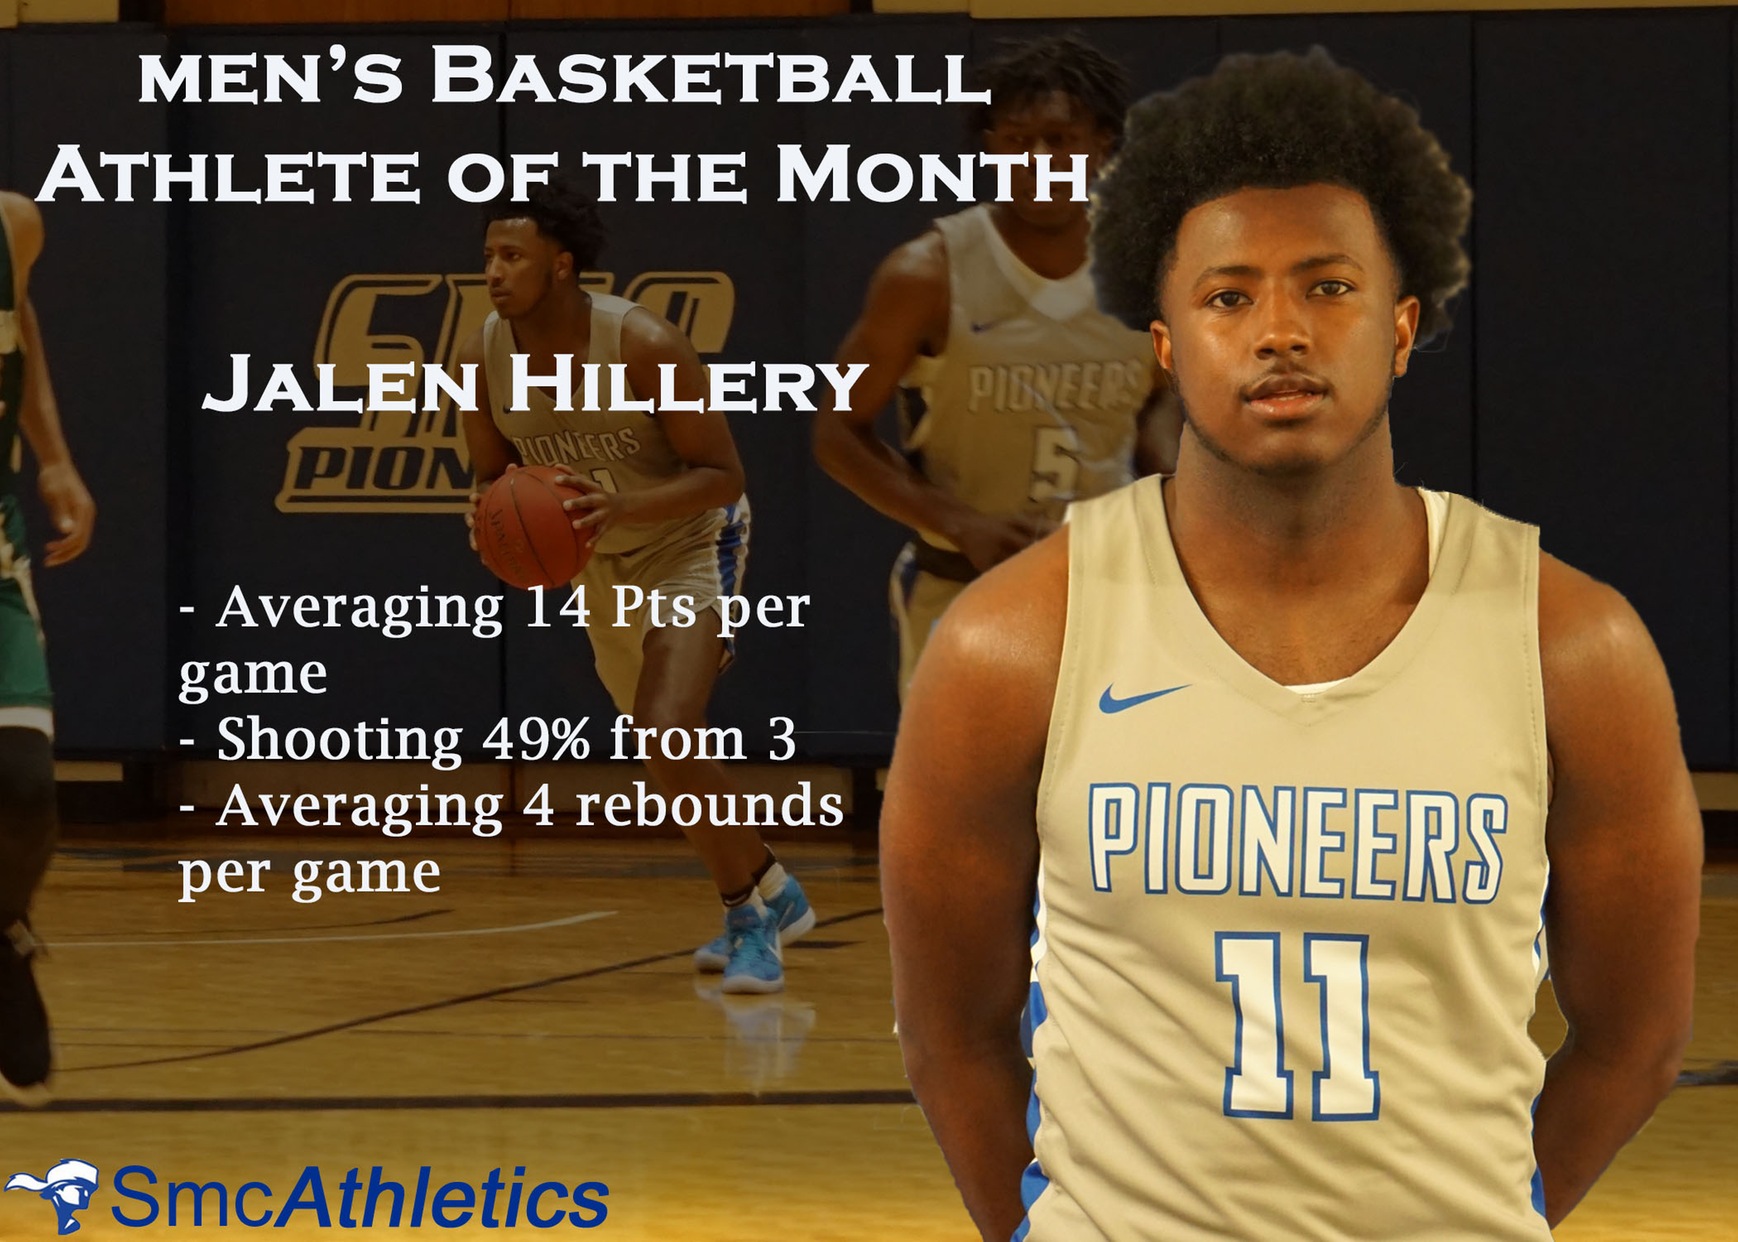 Men's Basketball Athlete of the Month